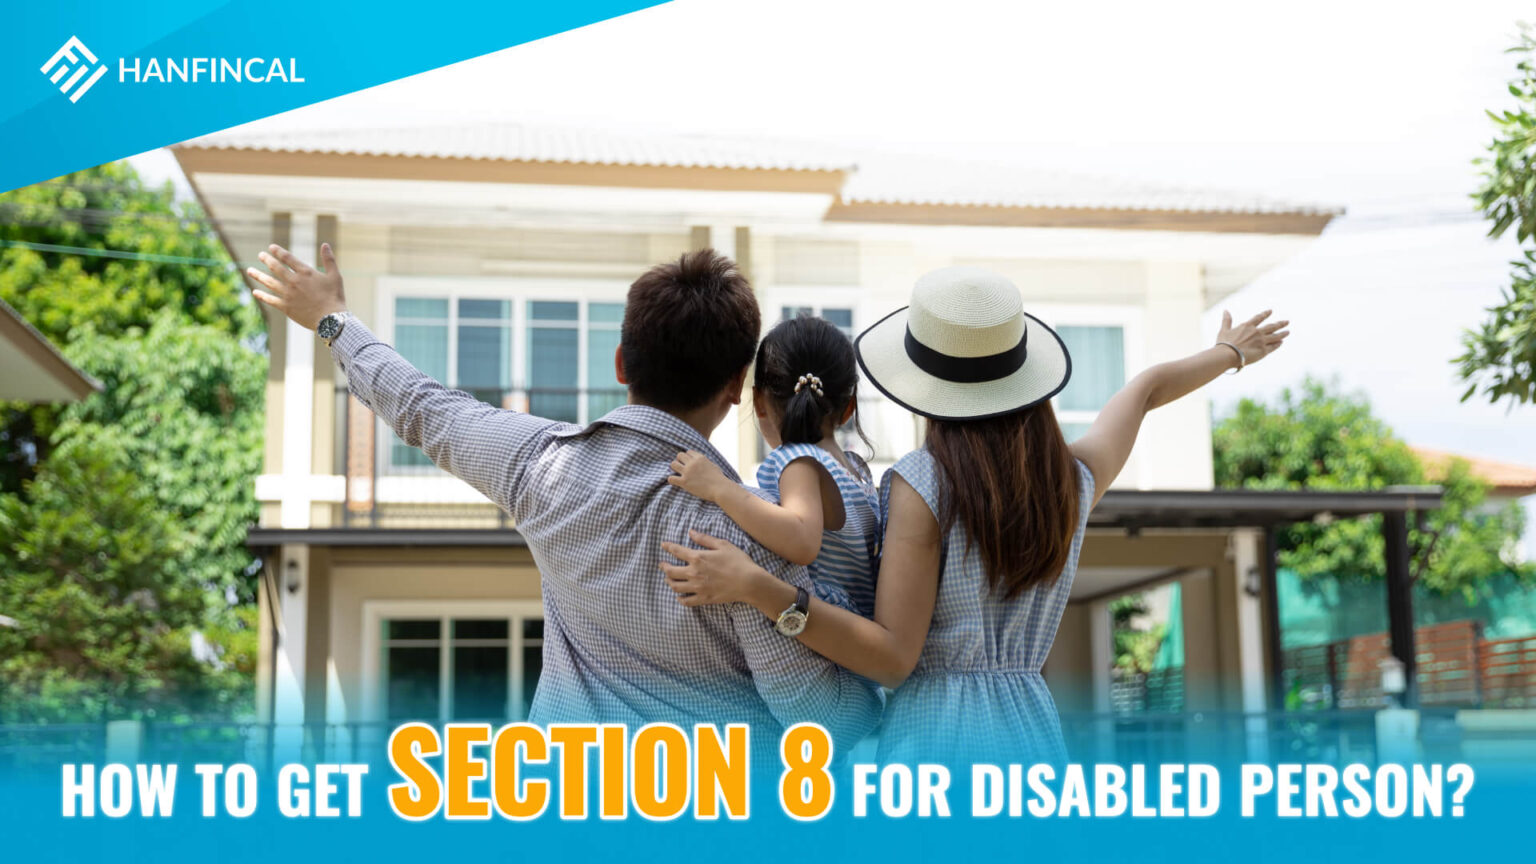 how-to-get-section-8-for-disabled-person-hanfincal